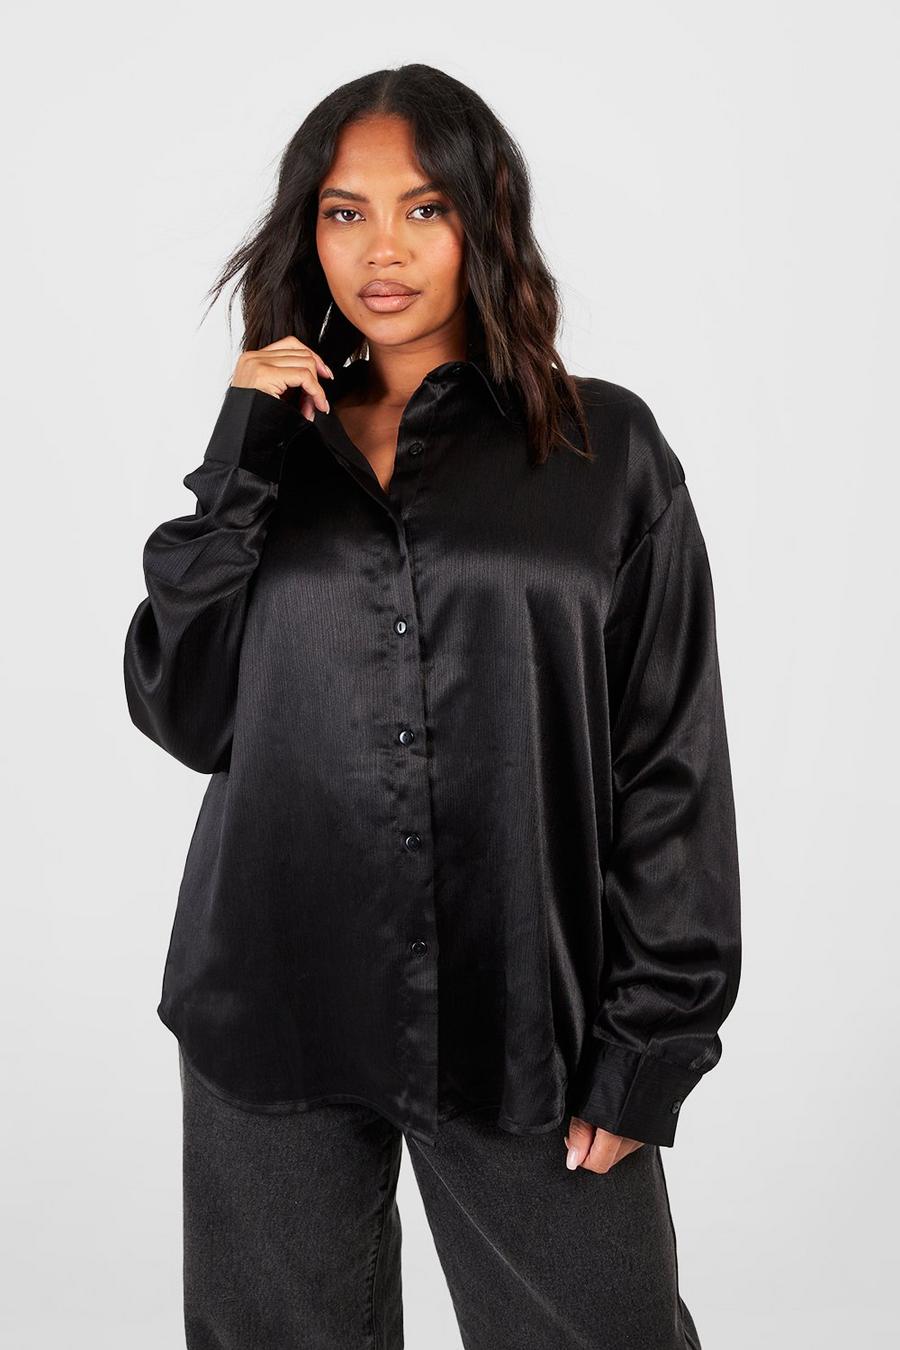 Plus Size Tops | Plus Size Tops for Women | boohoo USA